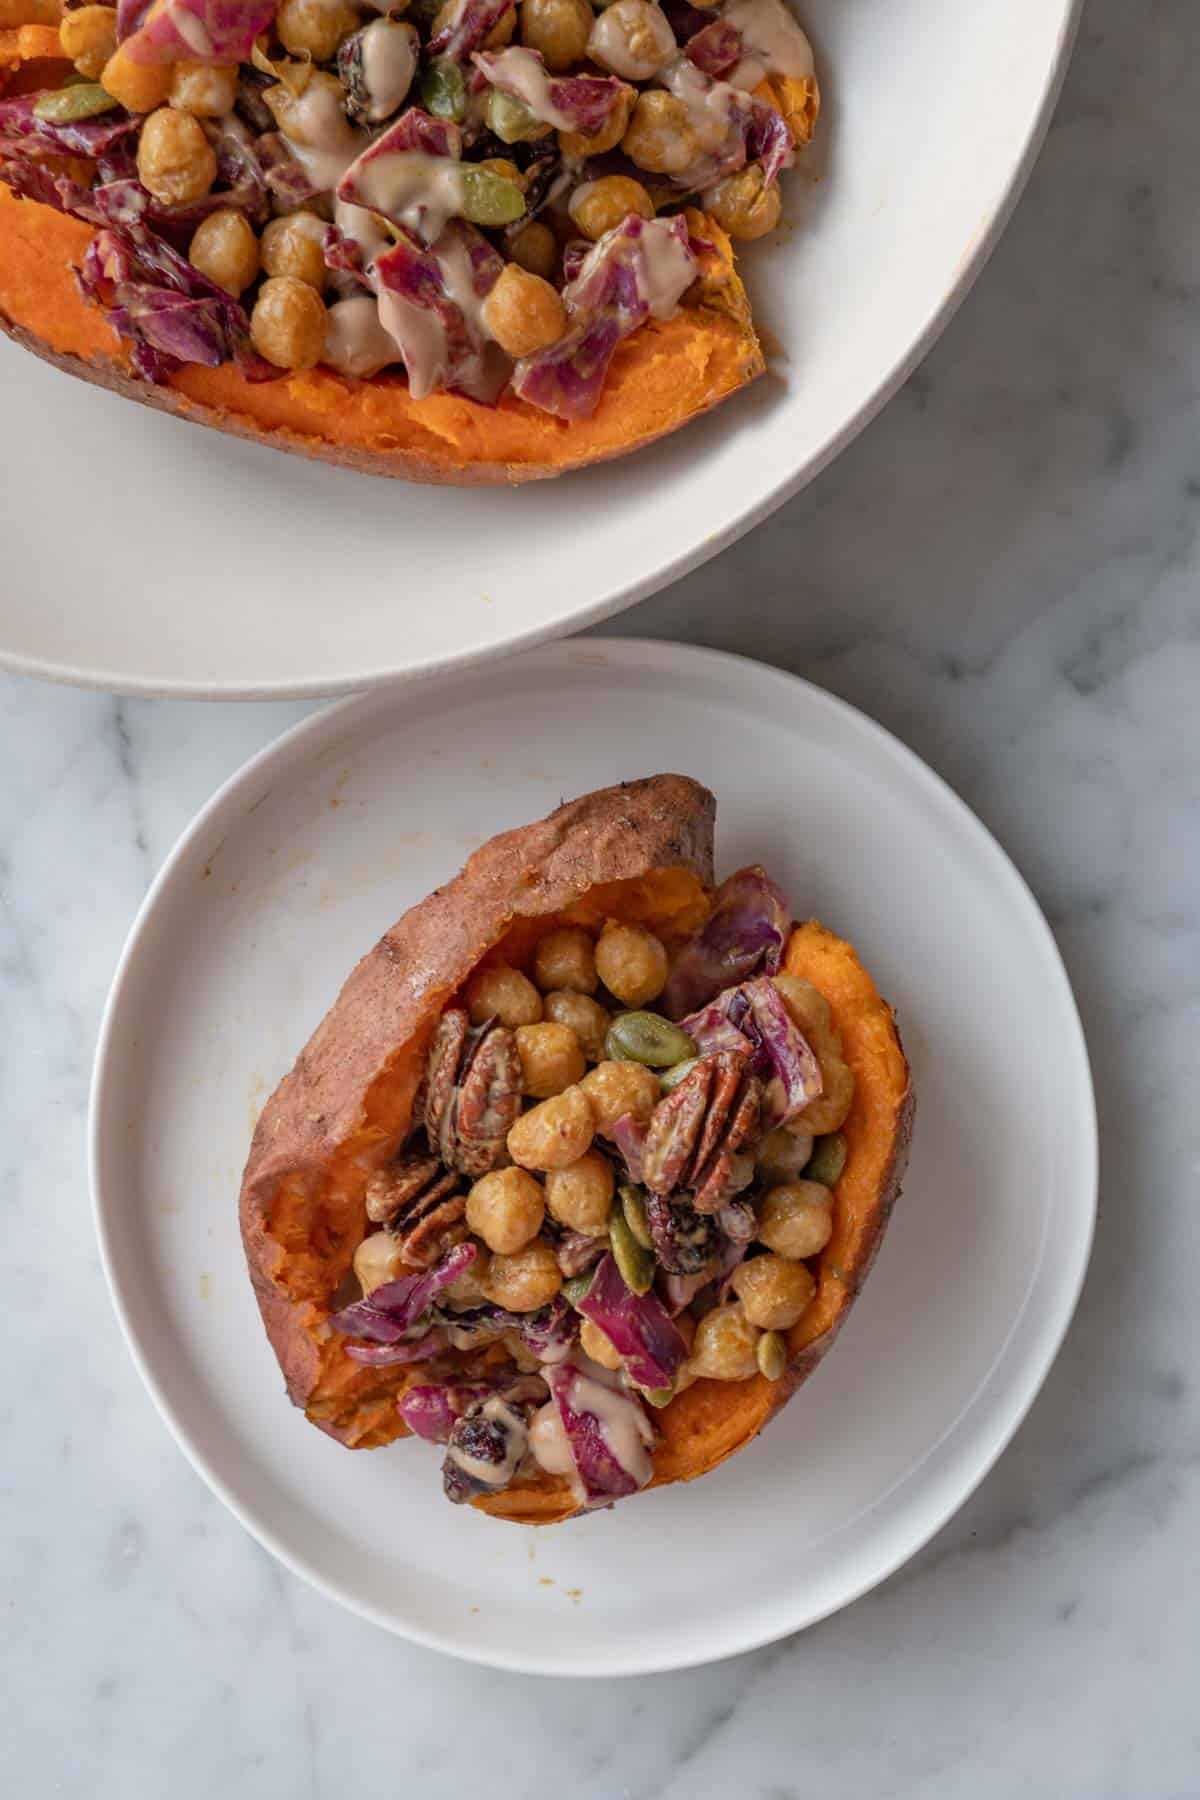 Sliced orange sweet potato stuffed with roasted chickpeas, red cabbage, dried cranberries, pecans, pepitas, and creamy dressing.